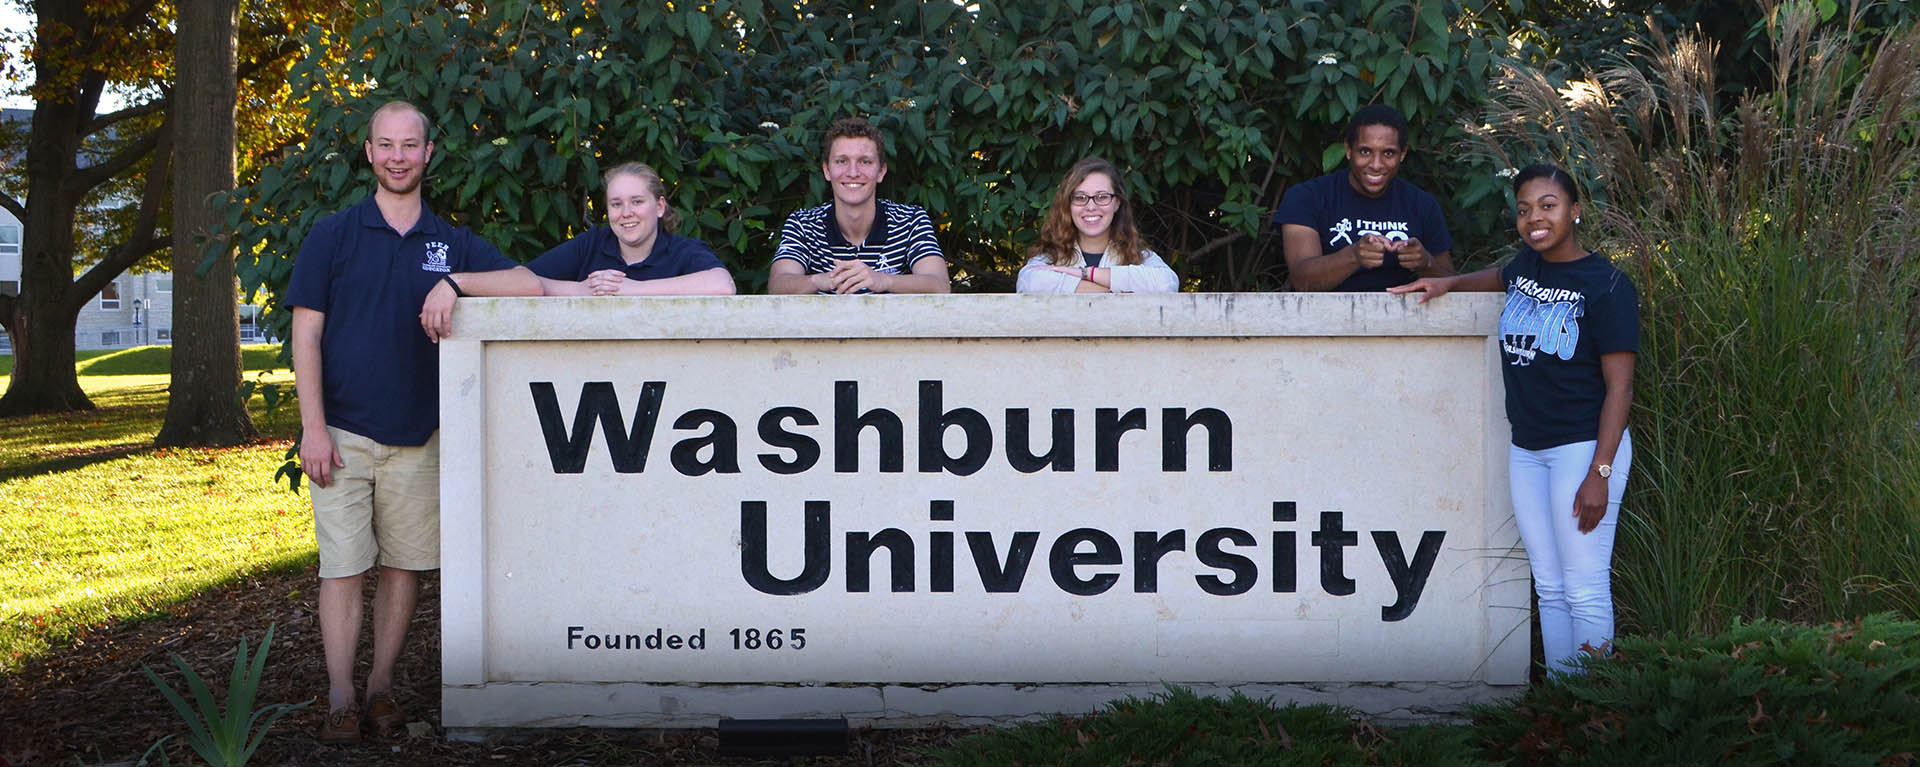 FYE students pose for a photo by the Washburn University sign.